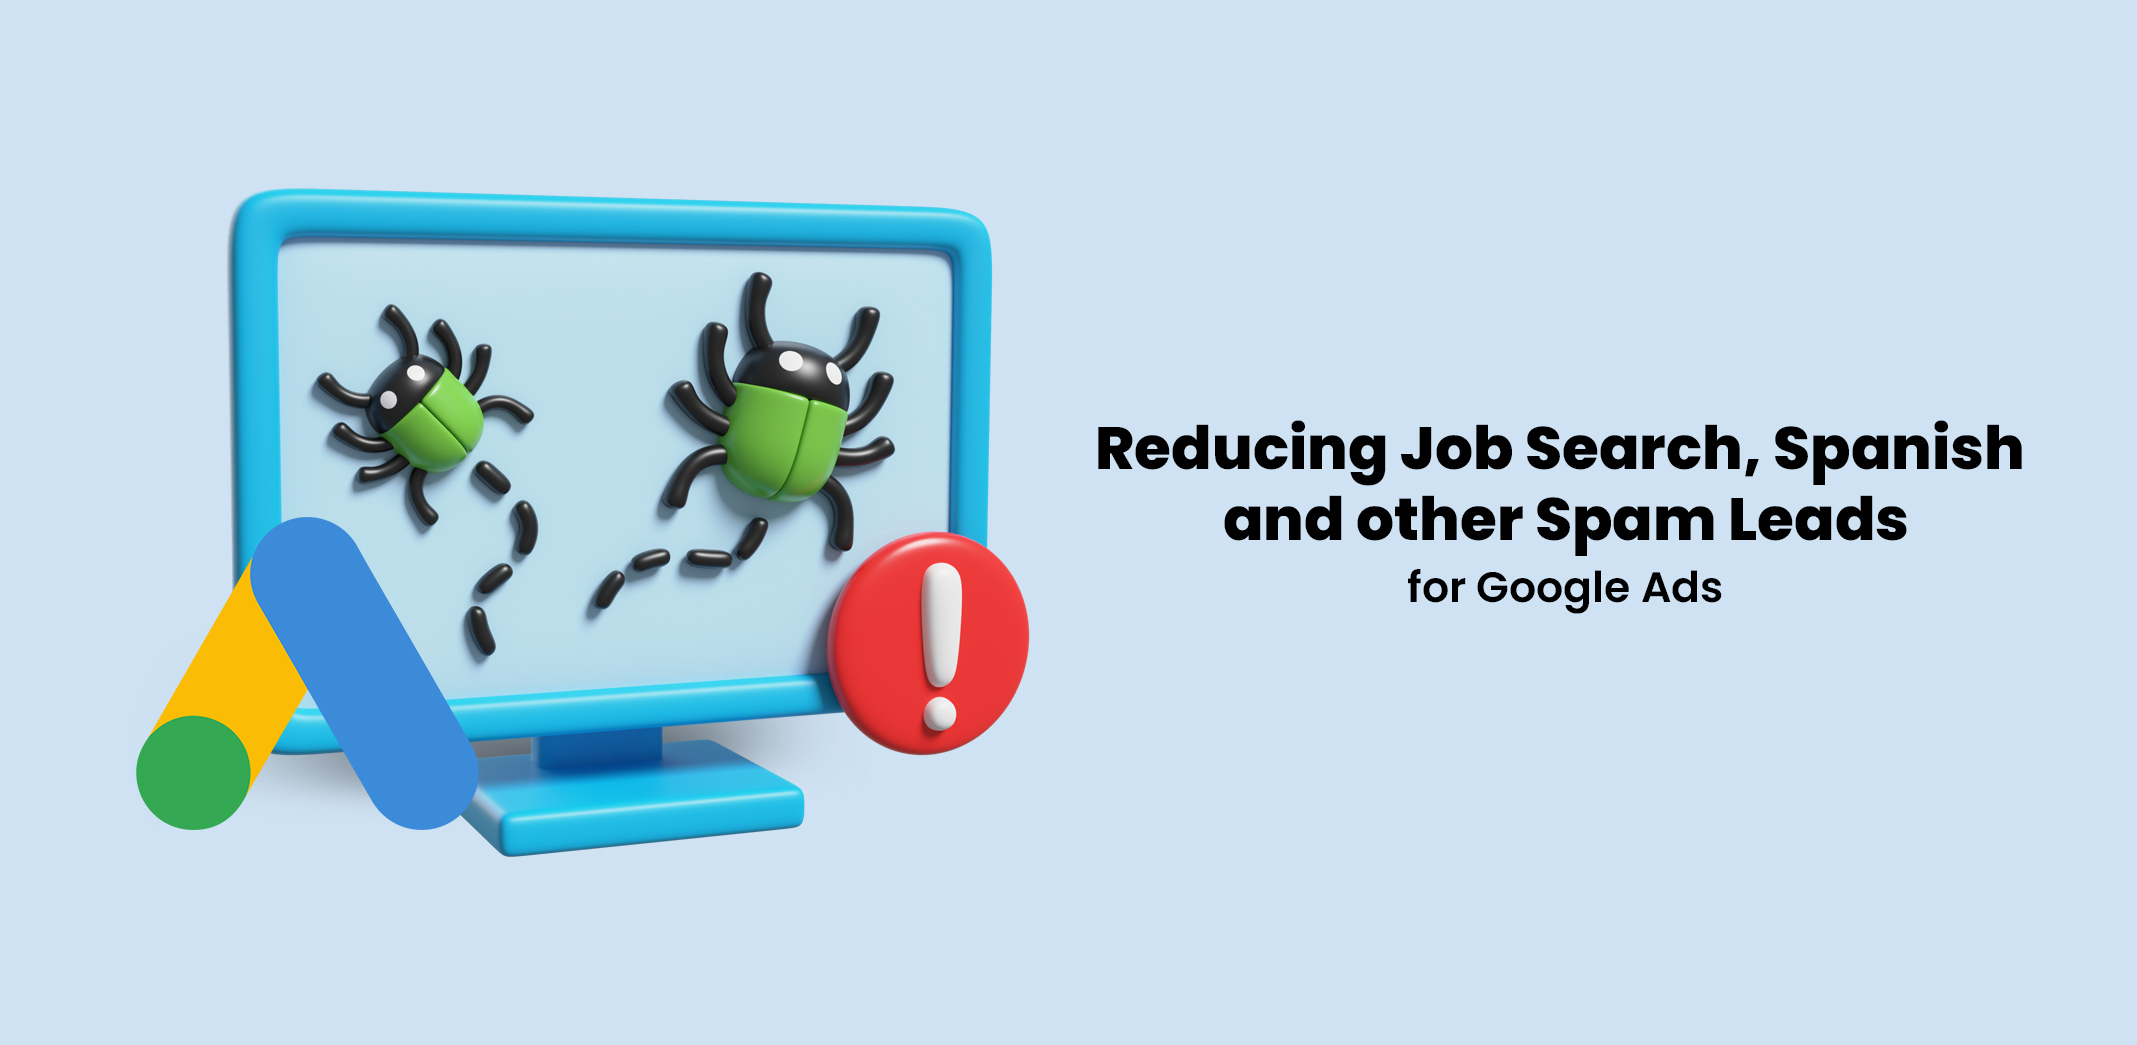  How to eliminate spam, Spanish and job-seeking leads from your Google Ads?